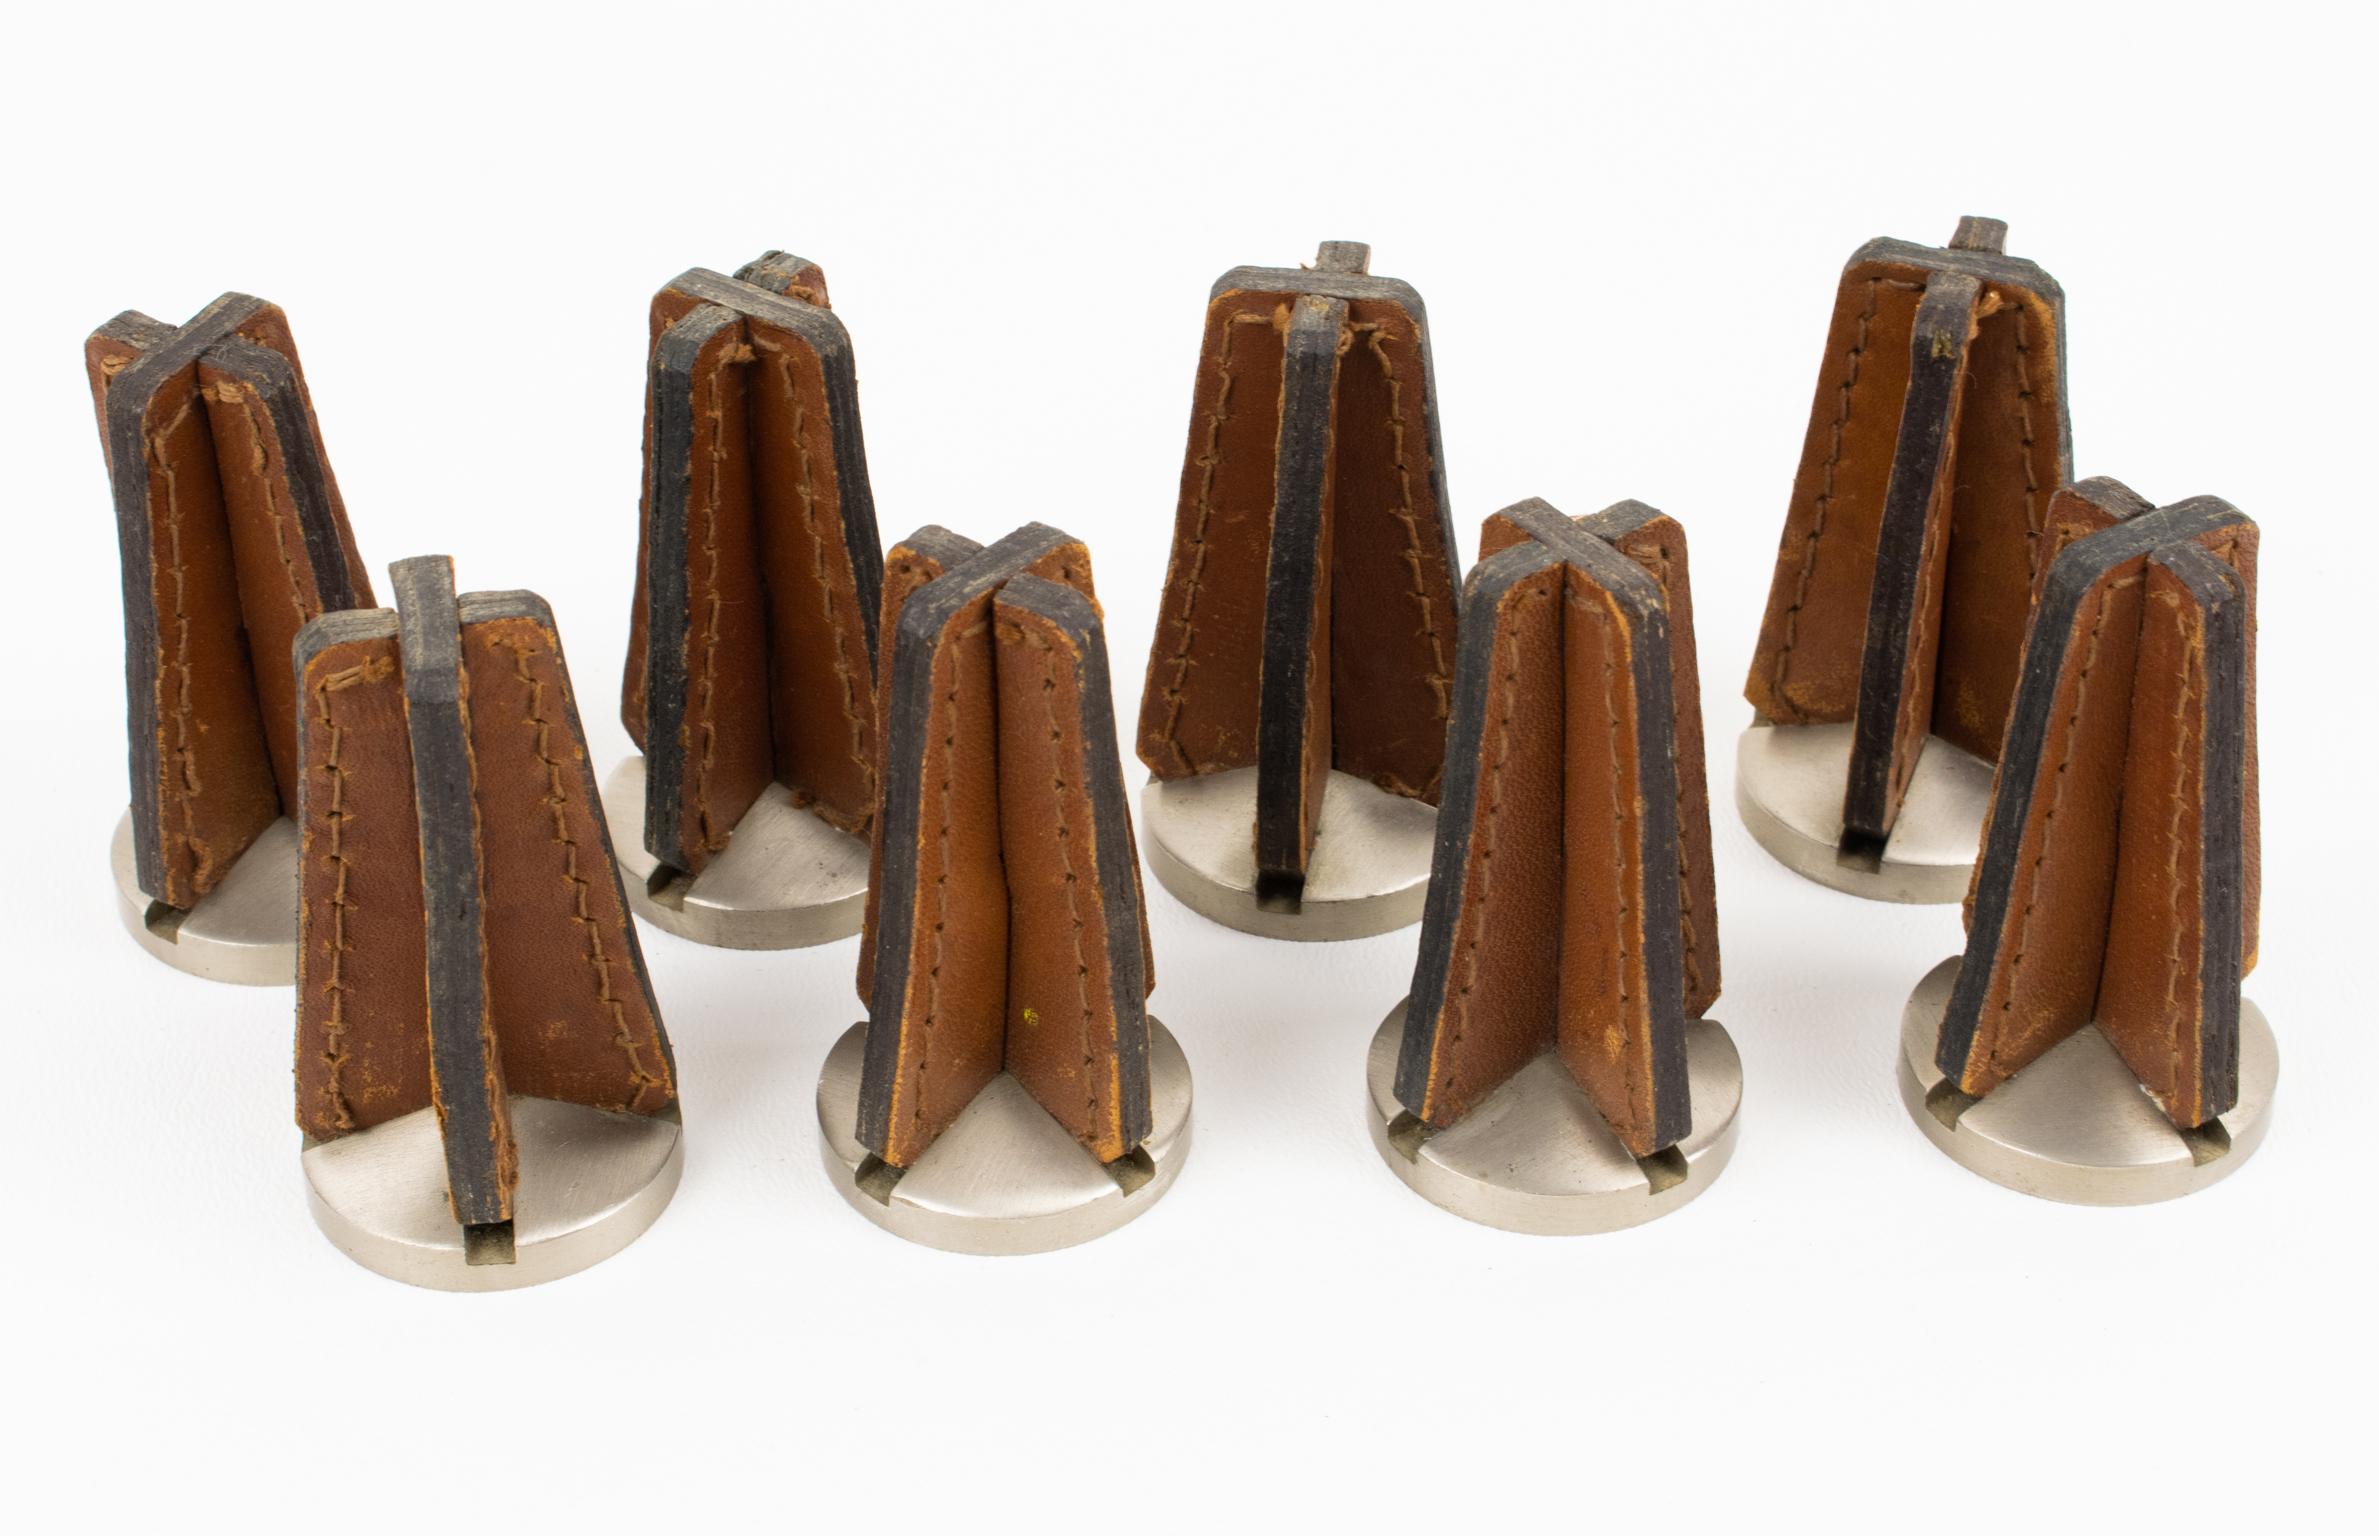 Metal Jacques Adnet Hand-Stitched Black and Cognac Leather Chess Board and Set For Sale